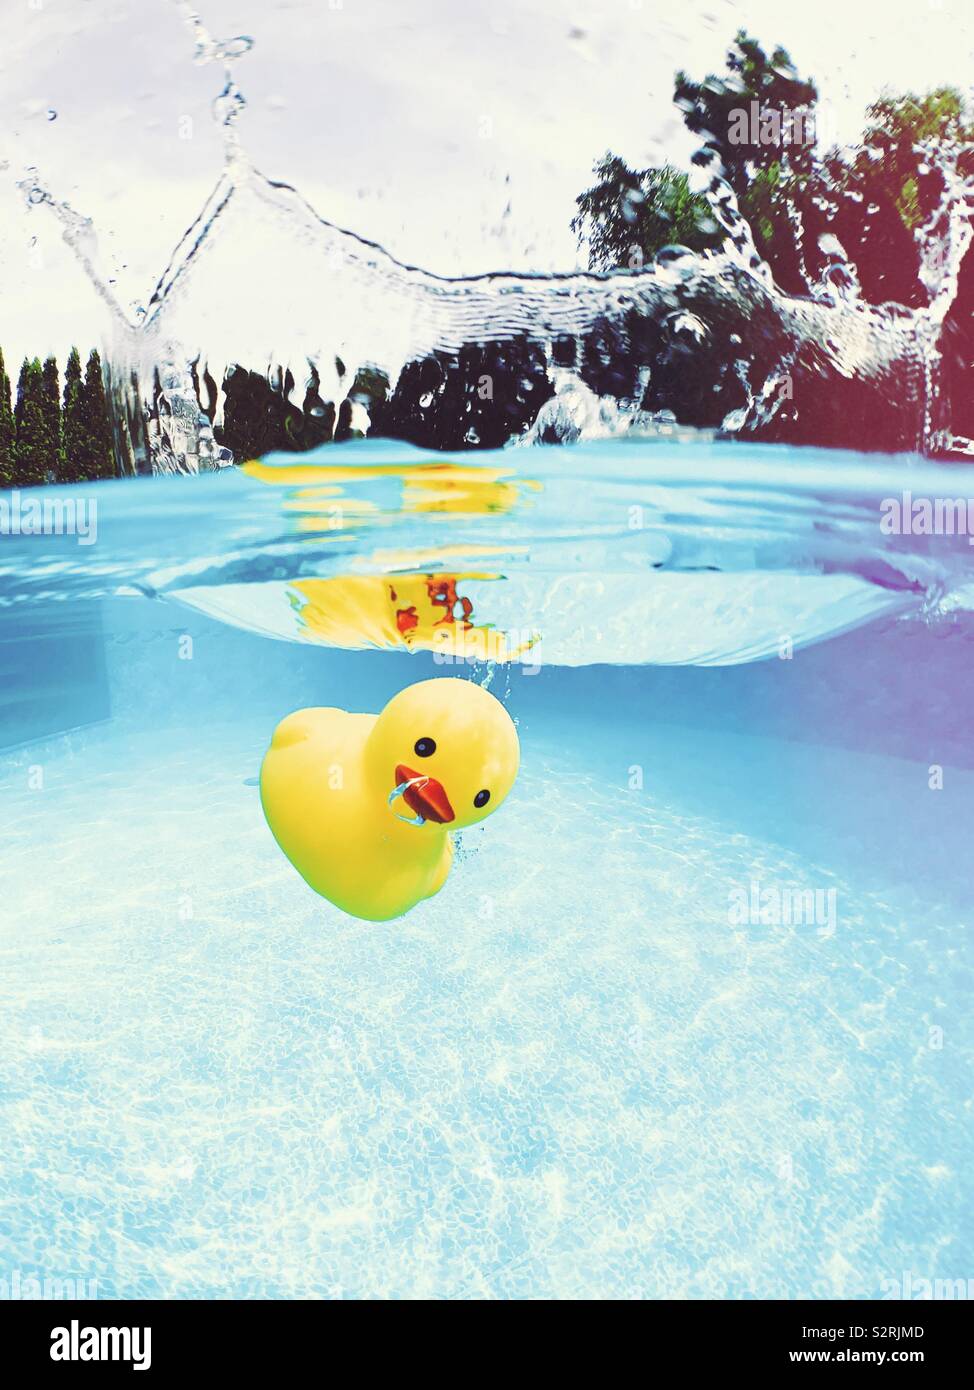 Yellow rubber ducky under water after plunging into swimming pool. Stock Photo